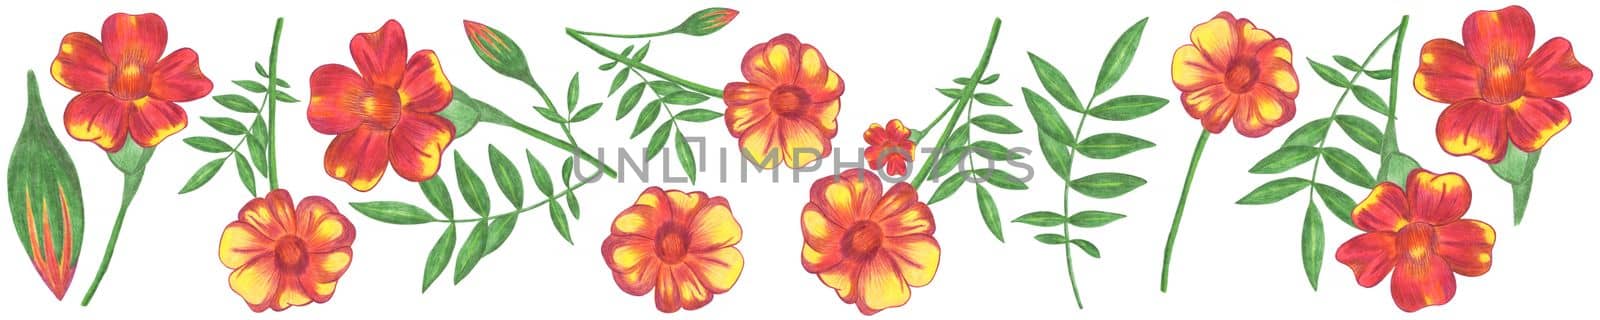 Set of Red and Yellow Flowers with Green Leaves Isolated on White Background. Red and Yellow Floral Element Drawn by Colored Pencil Collection.